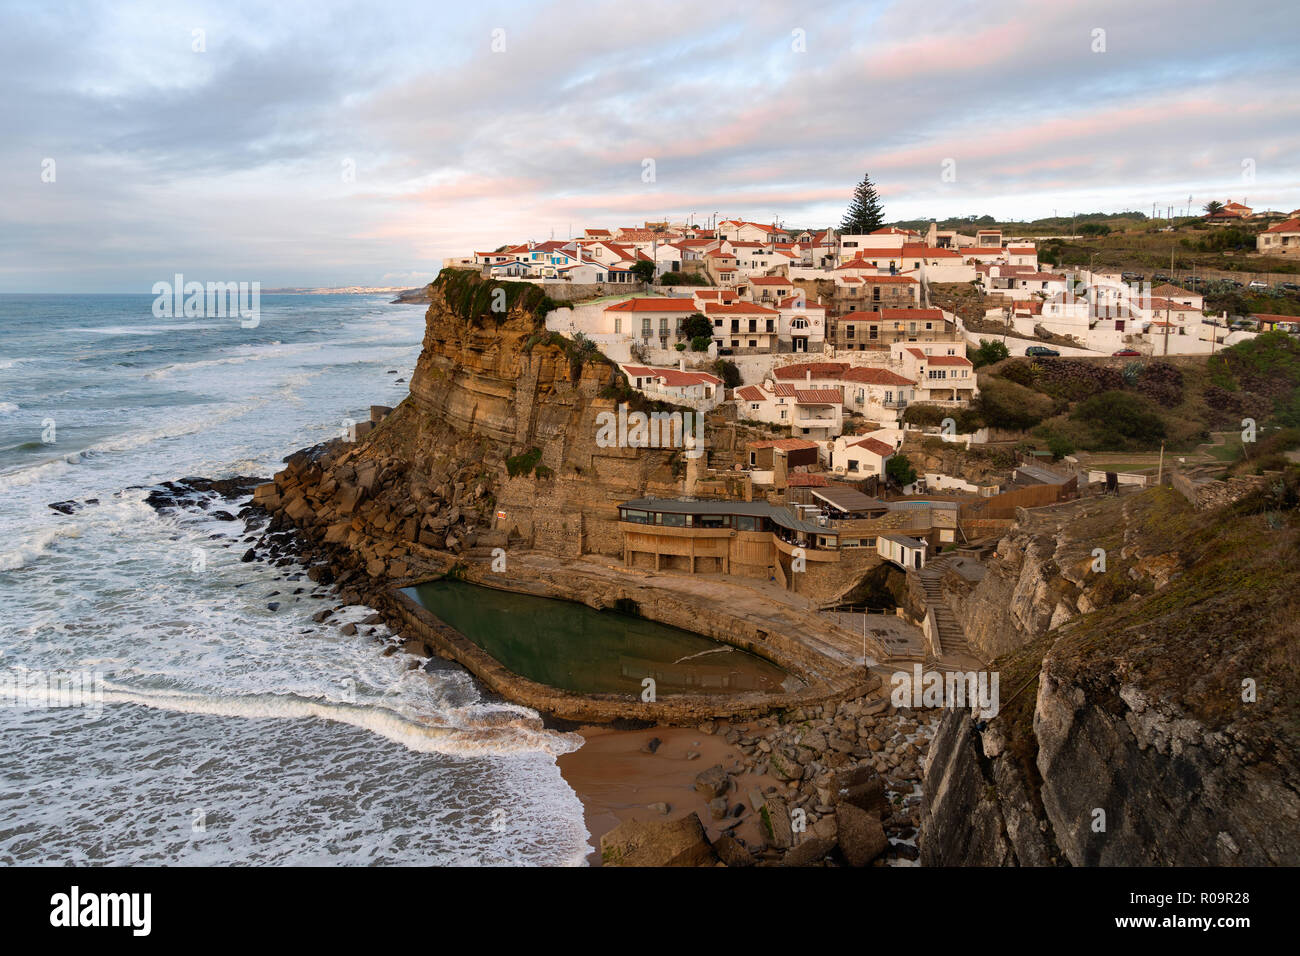 View of the Picturesque village Azenhas do Mar, on the edge of a cliff with a beach below. Landmark near Sintra, Lisbon, Portugal, Europe. landscape. Stock Photo